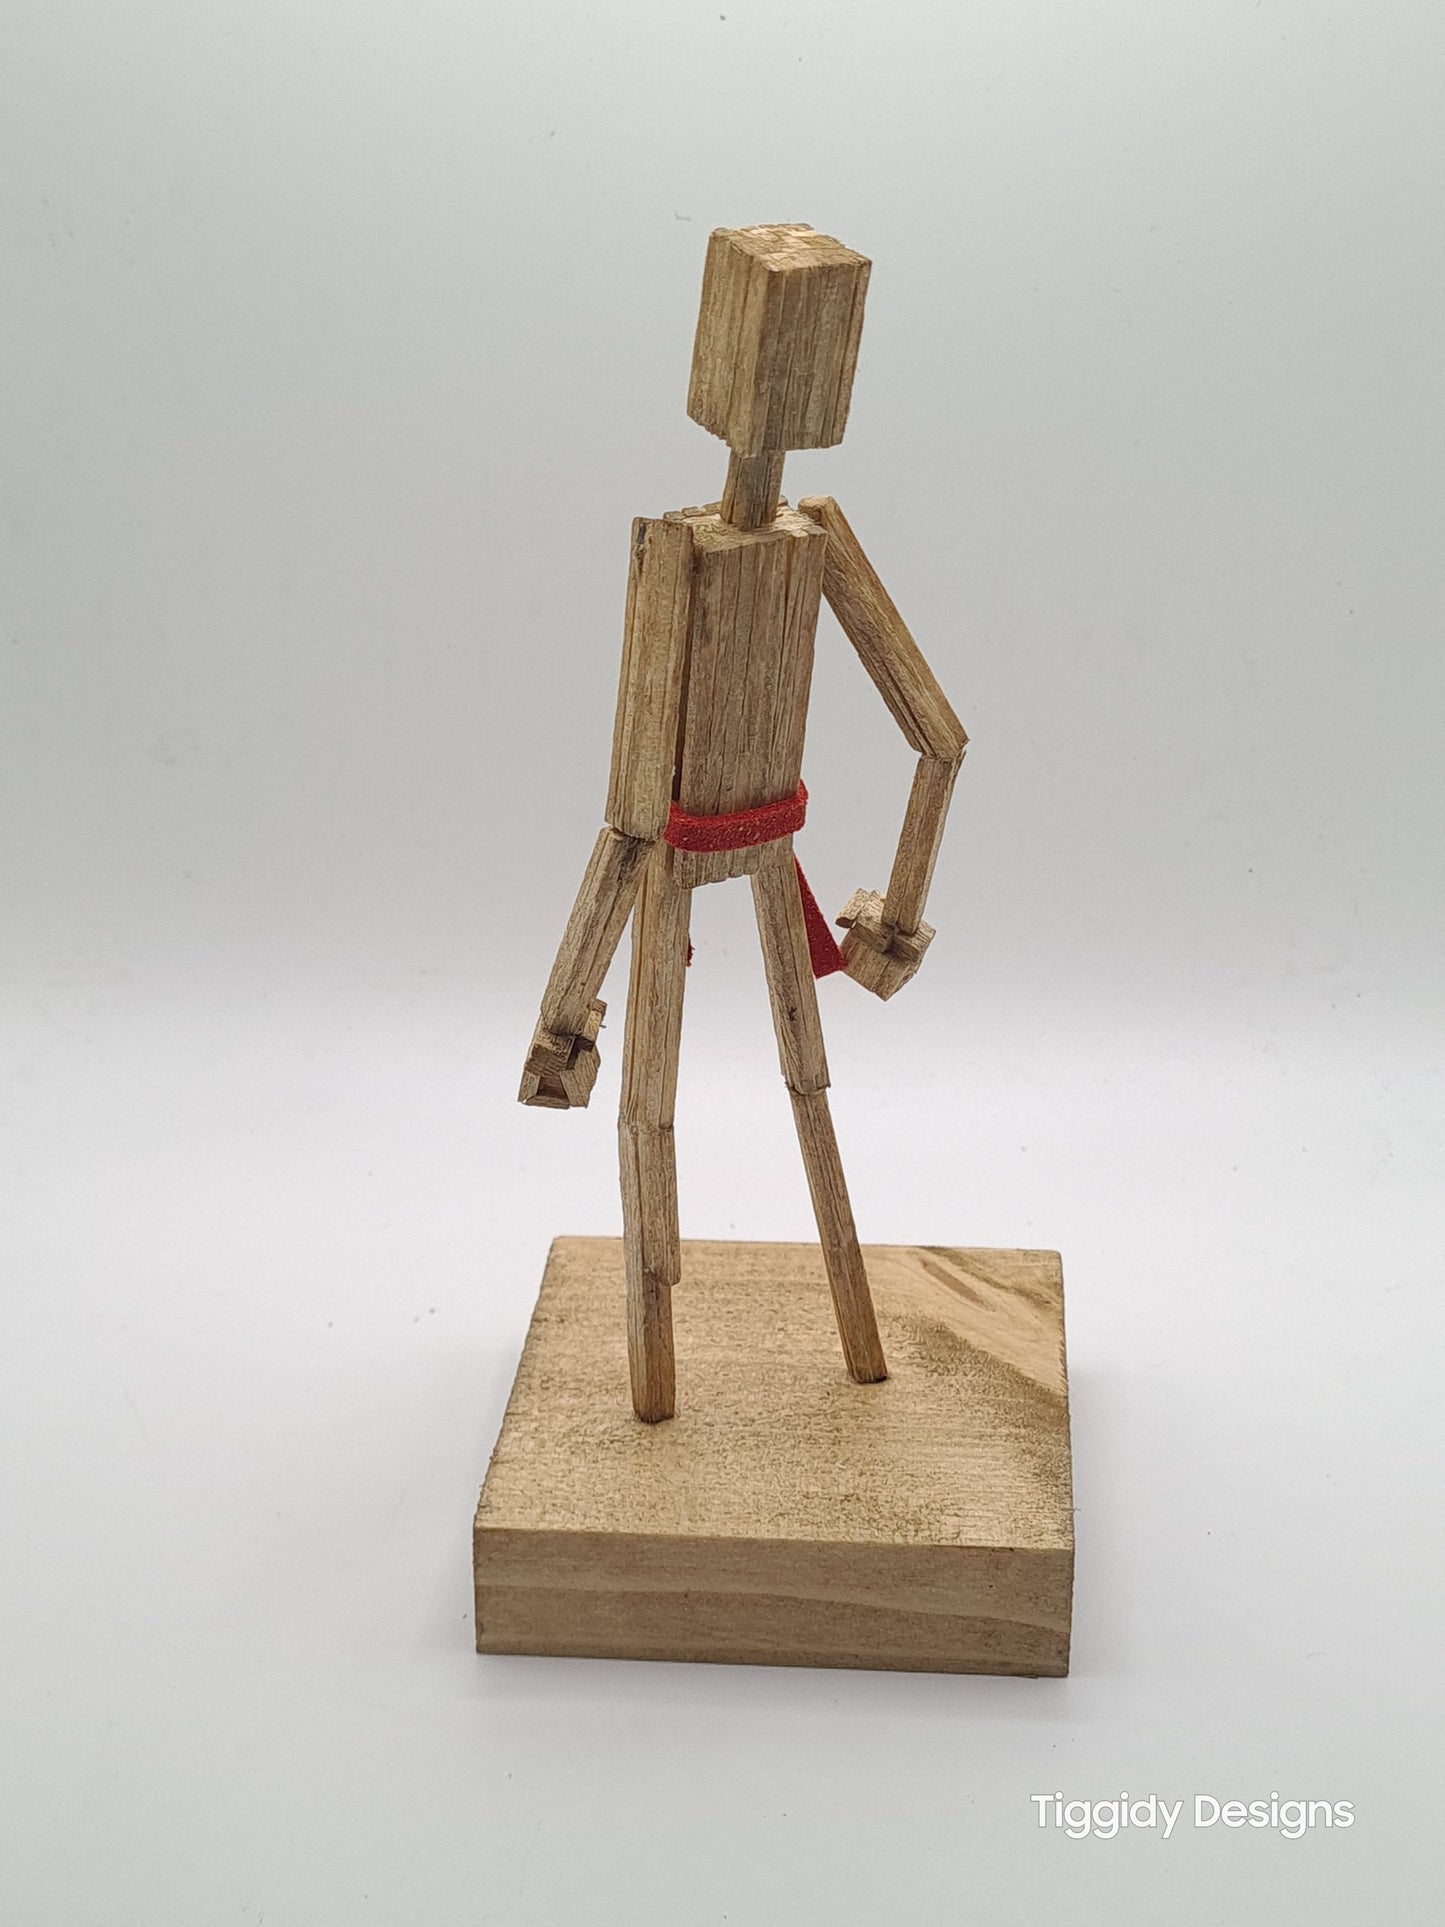 Say It With Your Chest - Handcrafted Wooden Matchstick Figures - Gifts, Ornaments and Decor By Tiggidy Designs